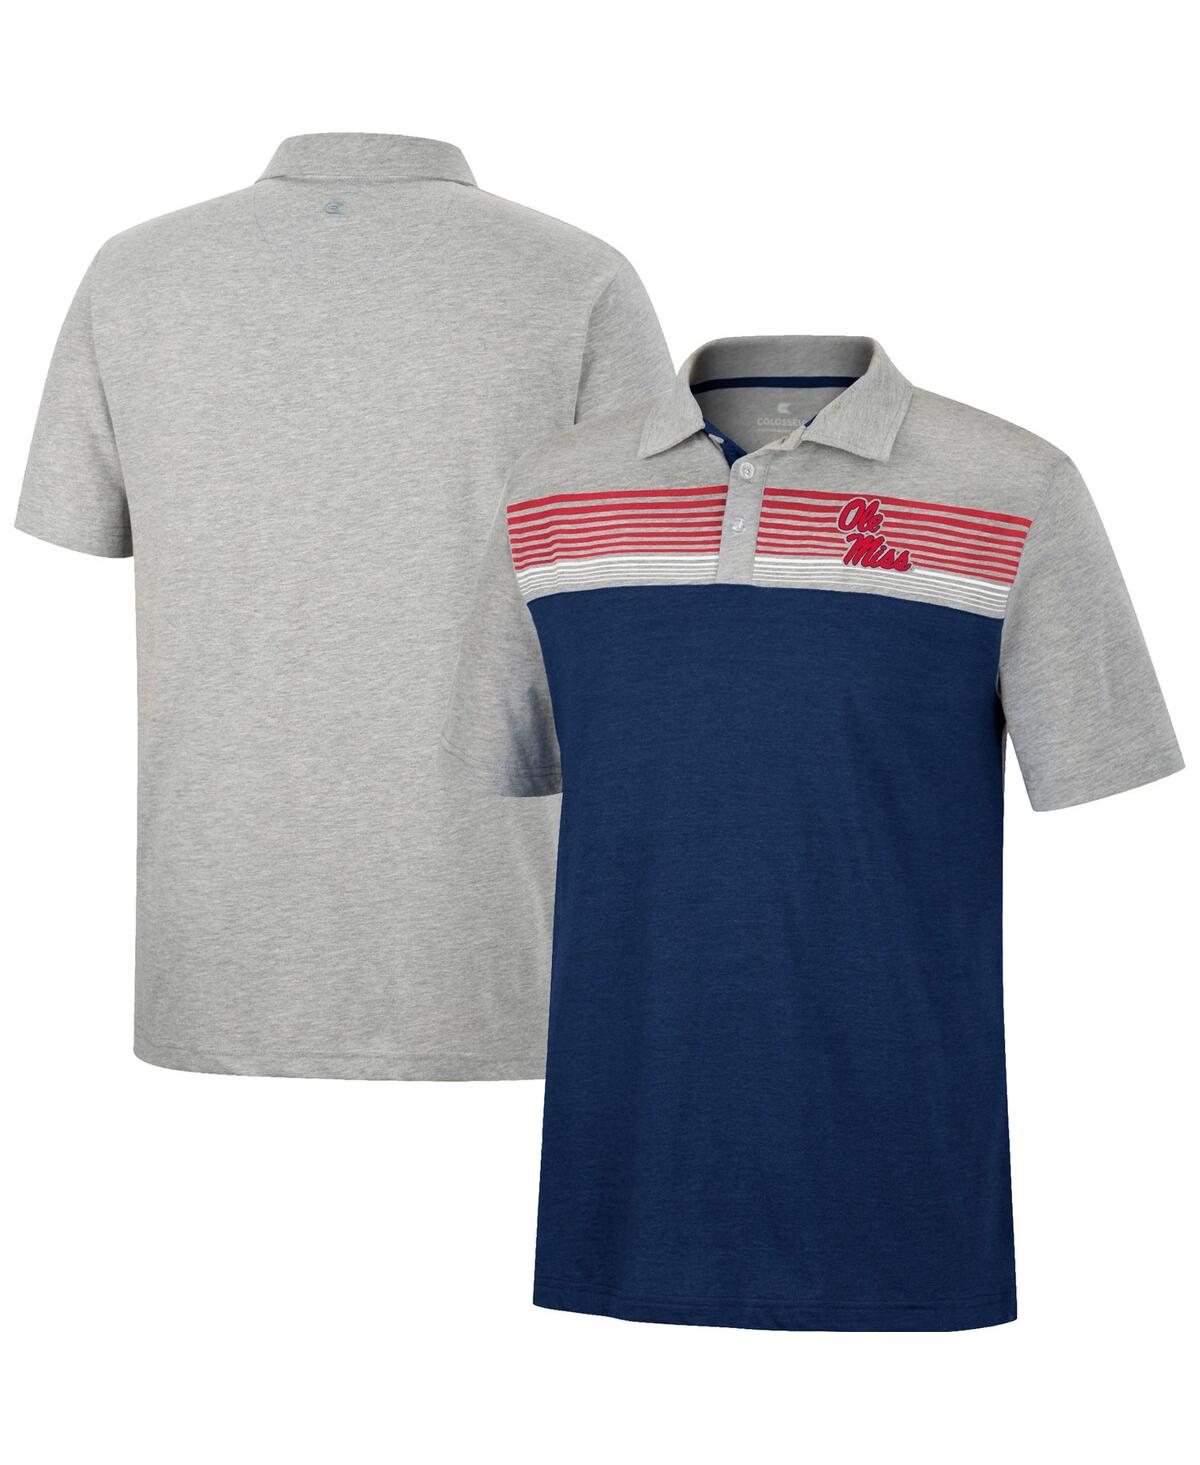 COLOSSEUM MEN'S COLOSSEUM NAVY, HEATHERED GRAY OLE MISS REBELS CADDIE POLO SHIRT